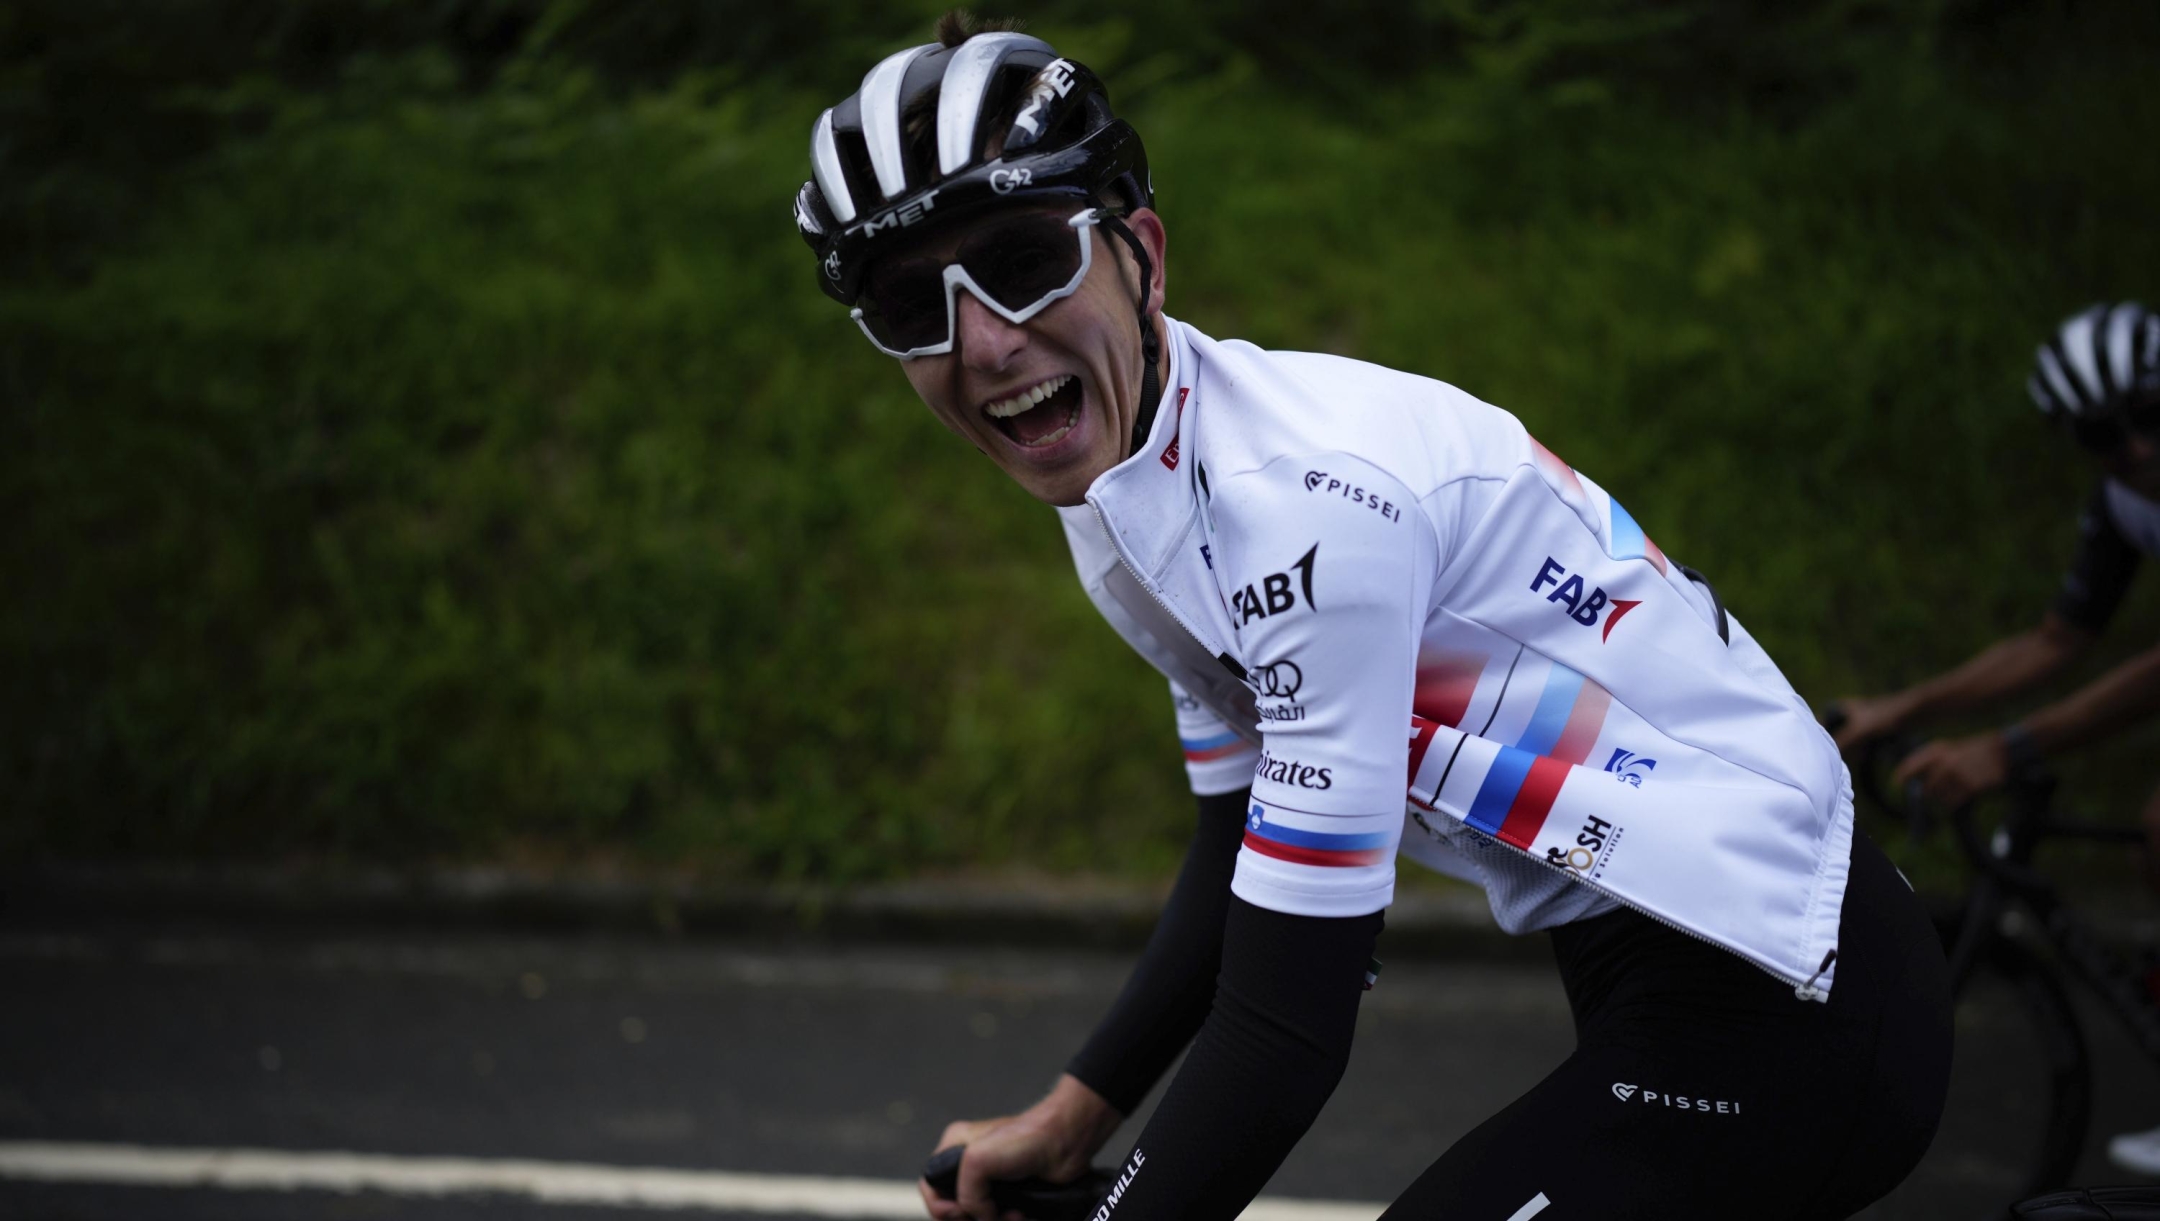 Slovenia's Tadej Pogacar laughs as he rides during a training session, in Bilbao, Spain, Friday, June 30, 2023. The Tour de France cycling race starts on Saturday, July 1, with the first stage over 182 kilometers (113 miles) with start and finish in Bilbao. (AP Photo/Daniel Cole)